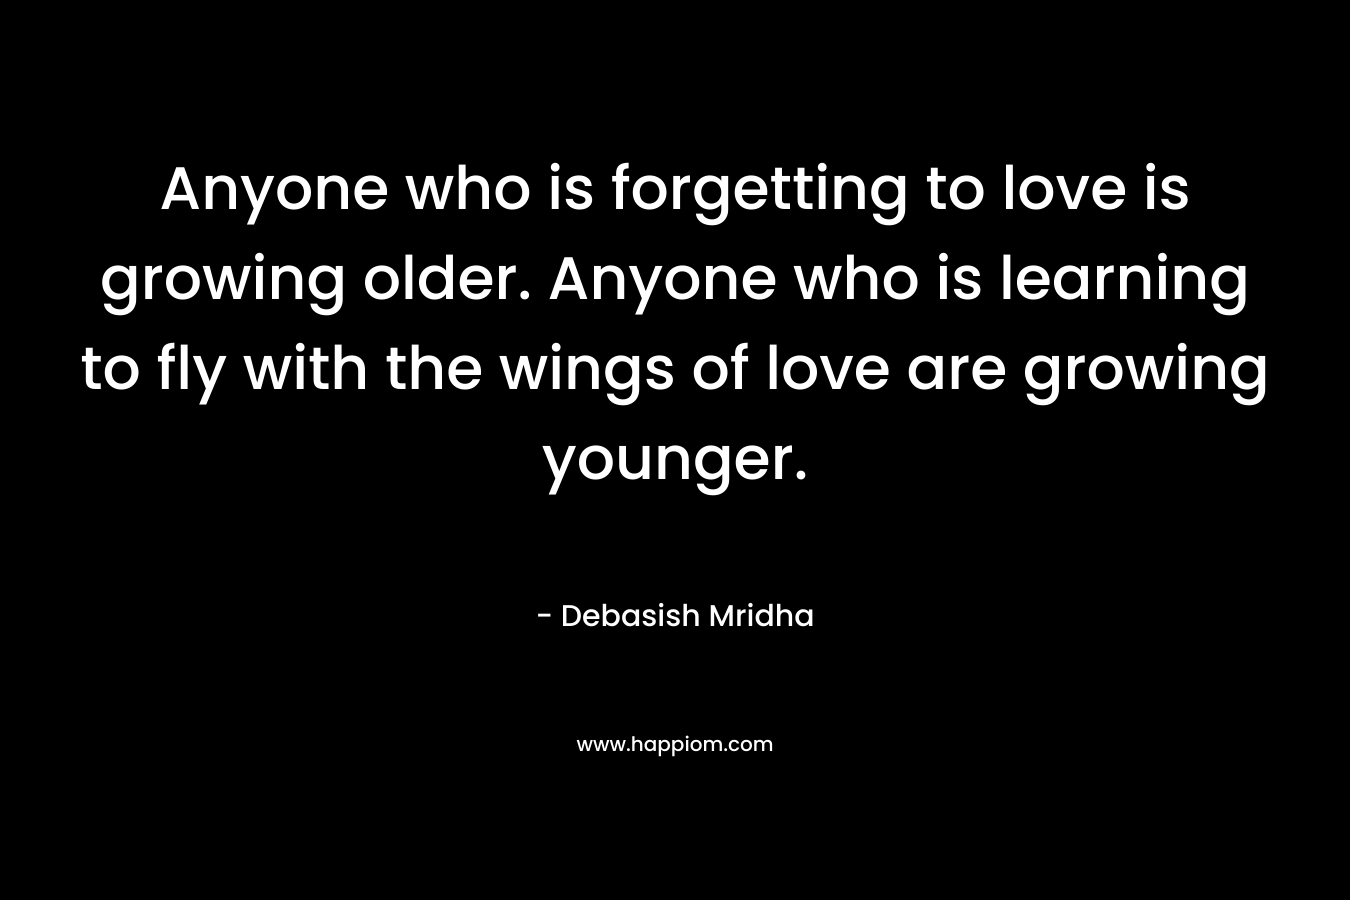 Anyone who is forgetting to love is growing older. Anyone who is learning to fly with the wings of love are growing younger.